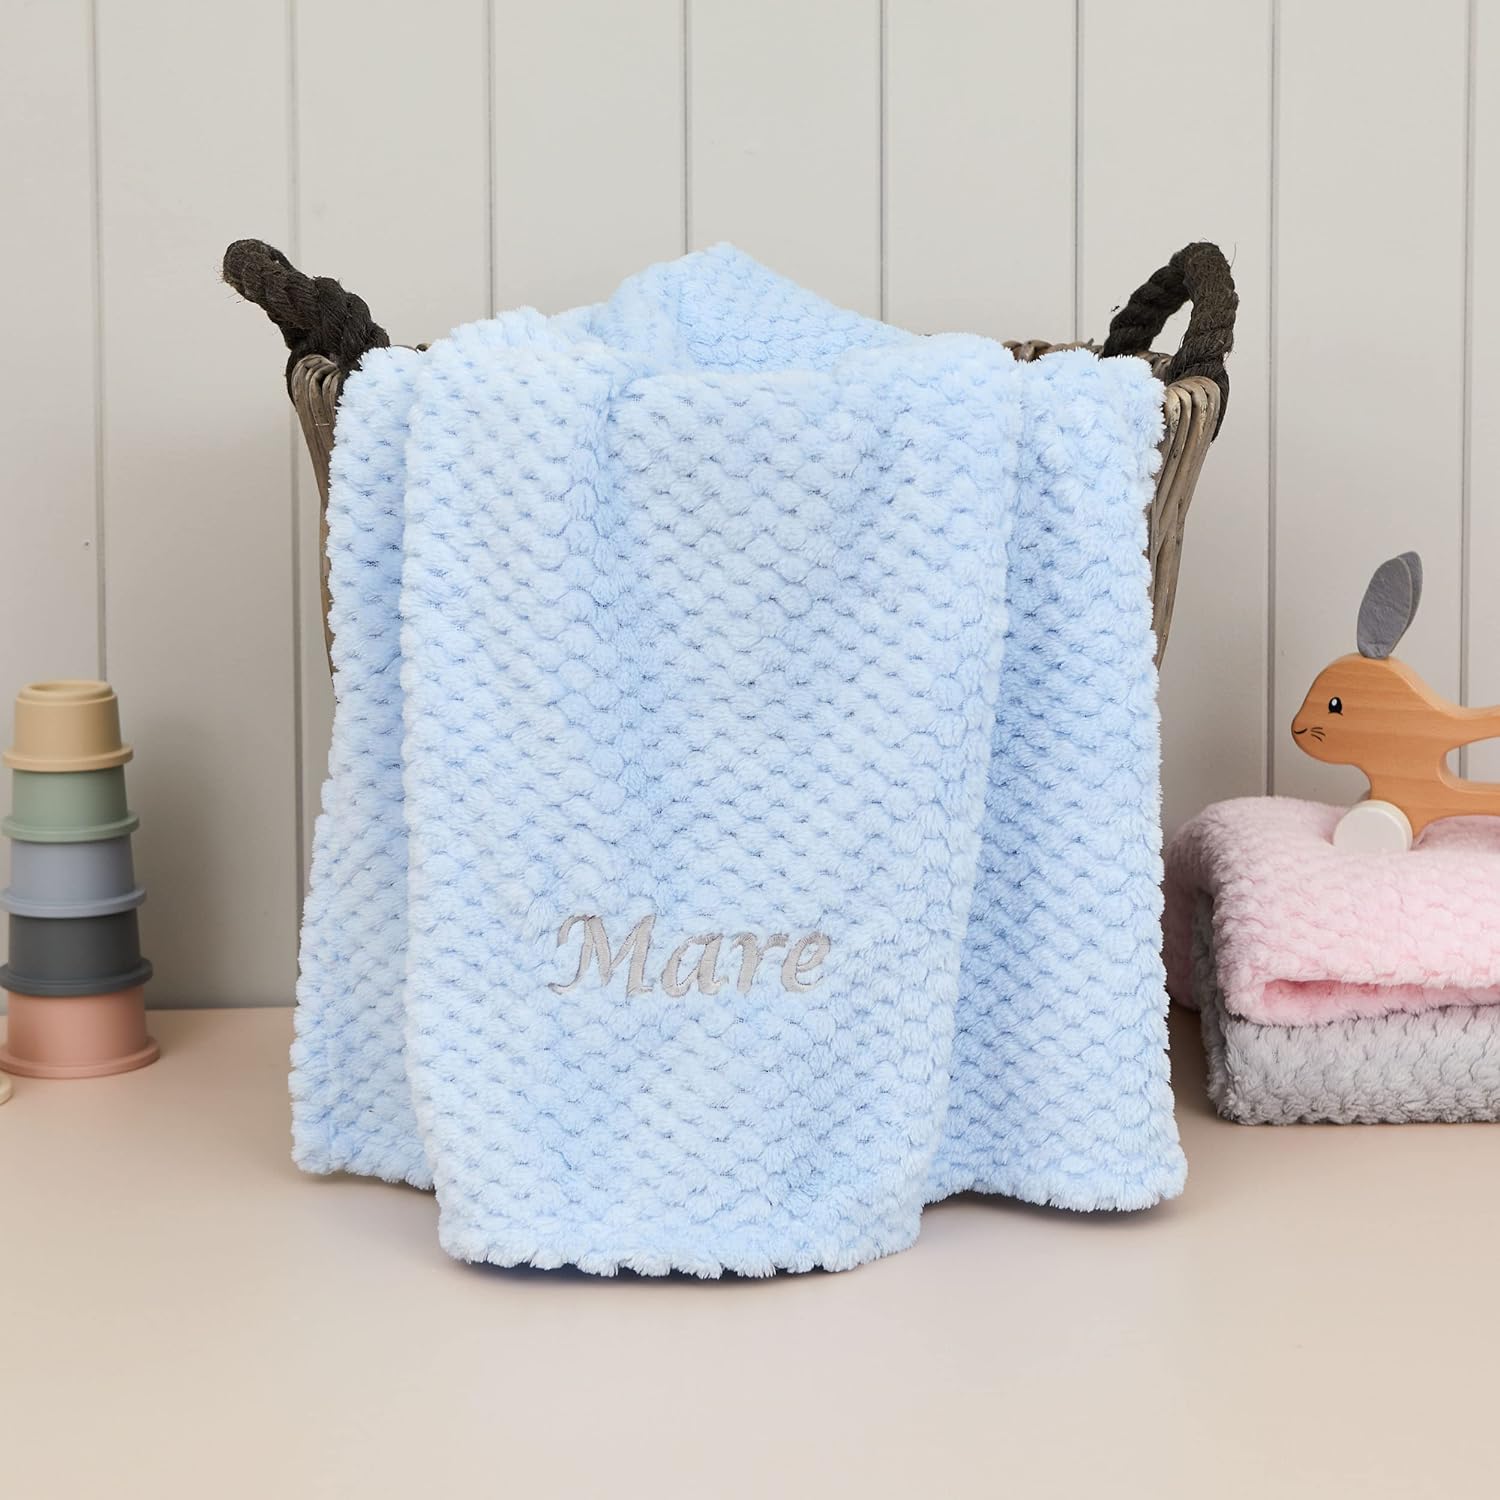 Hoolaroo Personalised Baby Blanket Embroidered Soft Baby Soft Breathable New Baby Gifts Baby Blanket Newborn Gift Blue Boy Present for Babies